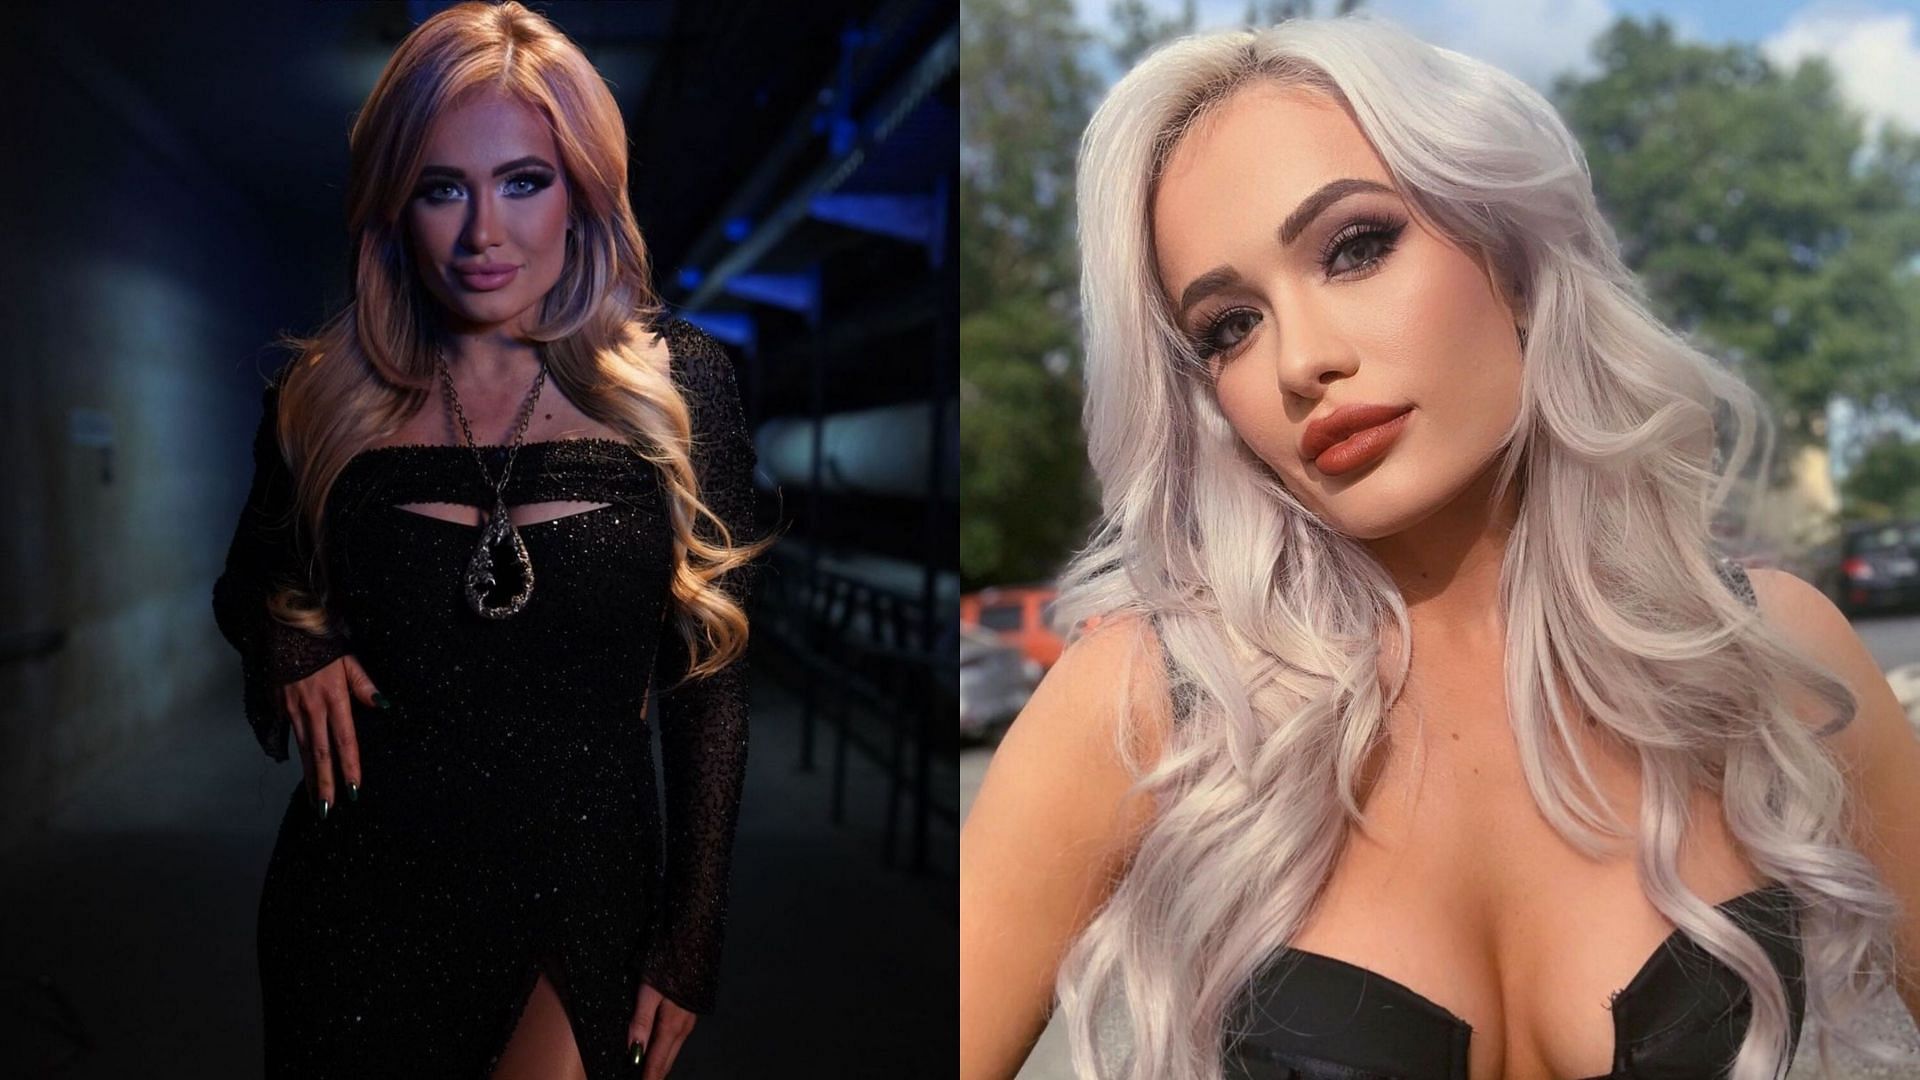 Scarlett Bordeaux is currently active on WWE SmackDown